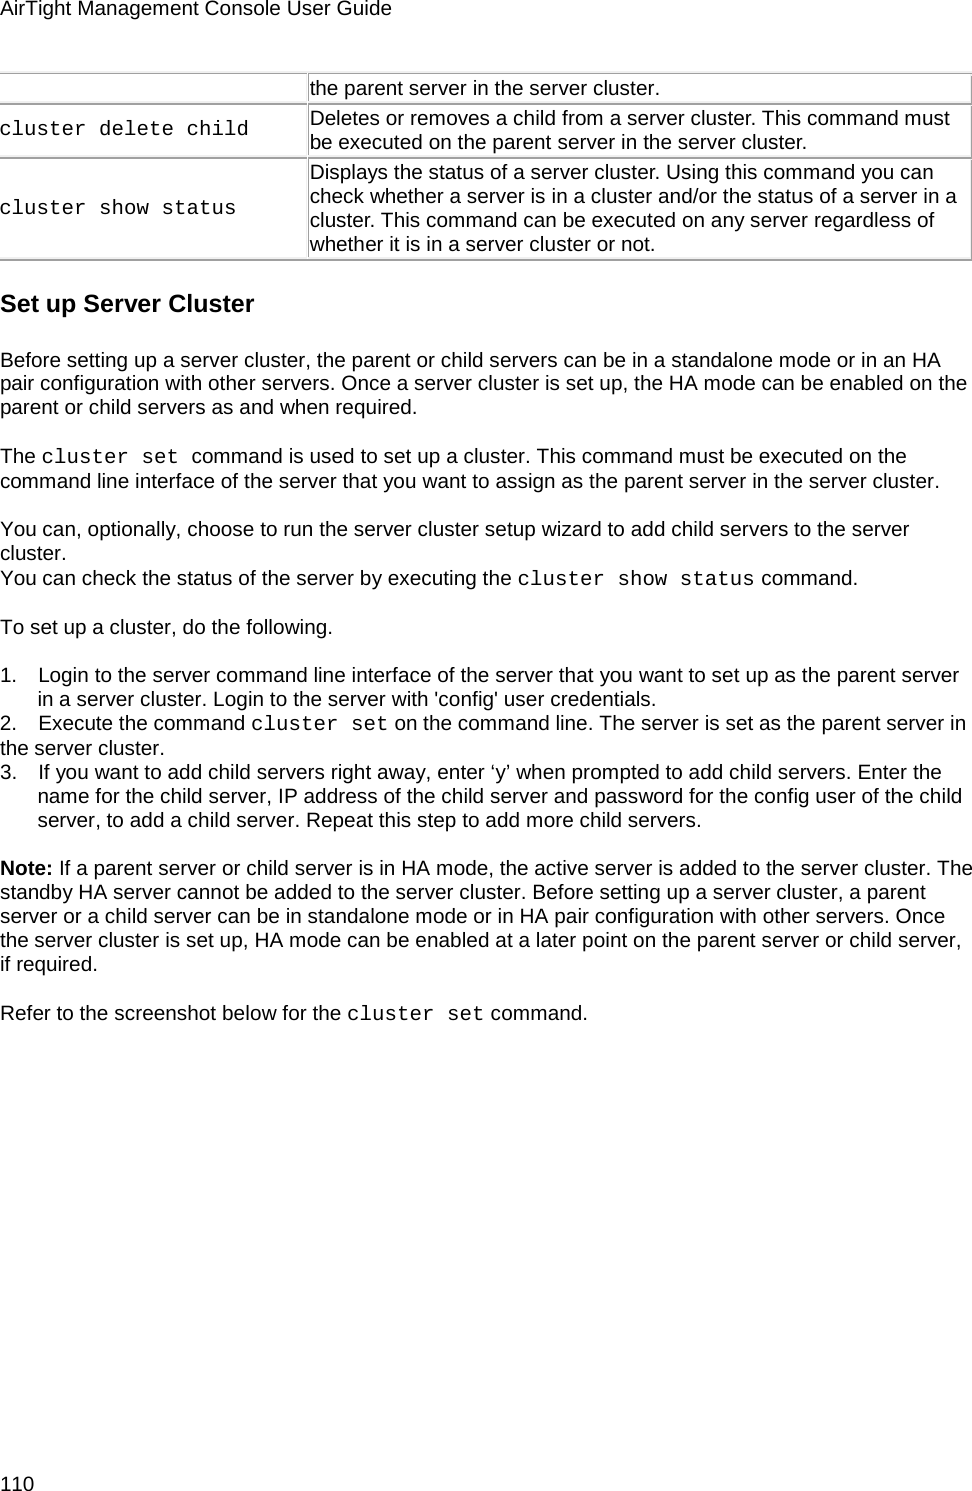 AirTight Management Console User Guide 110 the parent server in the server cluster.  cluster delete child  Deletes or removes a child from a server cluster. This command must be executed on the parent server in the server cluster.  cluster show status  Displays the status of a server cluster. Using this command you can check whether a server is in a cluster and/or the status of a server in a cluster. This command can be executed on any server regardless of whether it is in a server cluster or not.  Set up Server Cluster Before setting up a server cluster, the parent or child servers can be in a standalone mode or in an HA pair configuration with other servers. Once a server cluster is set up, the HA mode can be enabled on the parent or child servers as and when required.   The cluster set command is used to set up a cluster. This command must be executed on the command line interface of the server that you want to assign as the parent server in the server cluster.   You can, optionally, choose to run the server cluster setup wizard to add child servers to the server cluster. You can check the status of the server by executing the cluster show status command.   To set up a cluster, do the following.   1.      Login to the server command line interface of the server that you want to set up as the parent server in a server cluster. Login to the server with &apos;config&apos; user credentials. 2.      Execute the command cluster set on the command line. The server is set as the parent server in the server cluster. 3.      If you want to add child servers right away, enter ‘y’ when prompted to add child servers. Enter the name for the child server, IP address of the child server and password for the config user of the child server, to add a child server. Repeat this step to add more child servers.   Note: If a parent server or child server is in HA mode, the active server is added to the server cluster. The standby HA server cannot be added to the server cluster. Before setting up a server cluster, a parent server or a child server can be in standalone mode or in HA pair configuration with other servers. Once the server cluster is set up, HA mode can be enabled at a later point on the parent server or child server, if required.   Refer to the screenshot below for the cluster set command. 